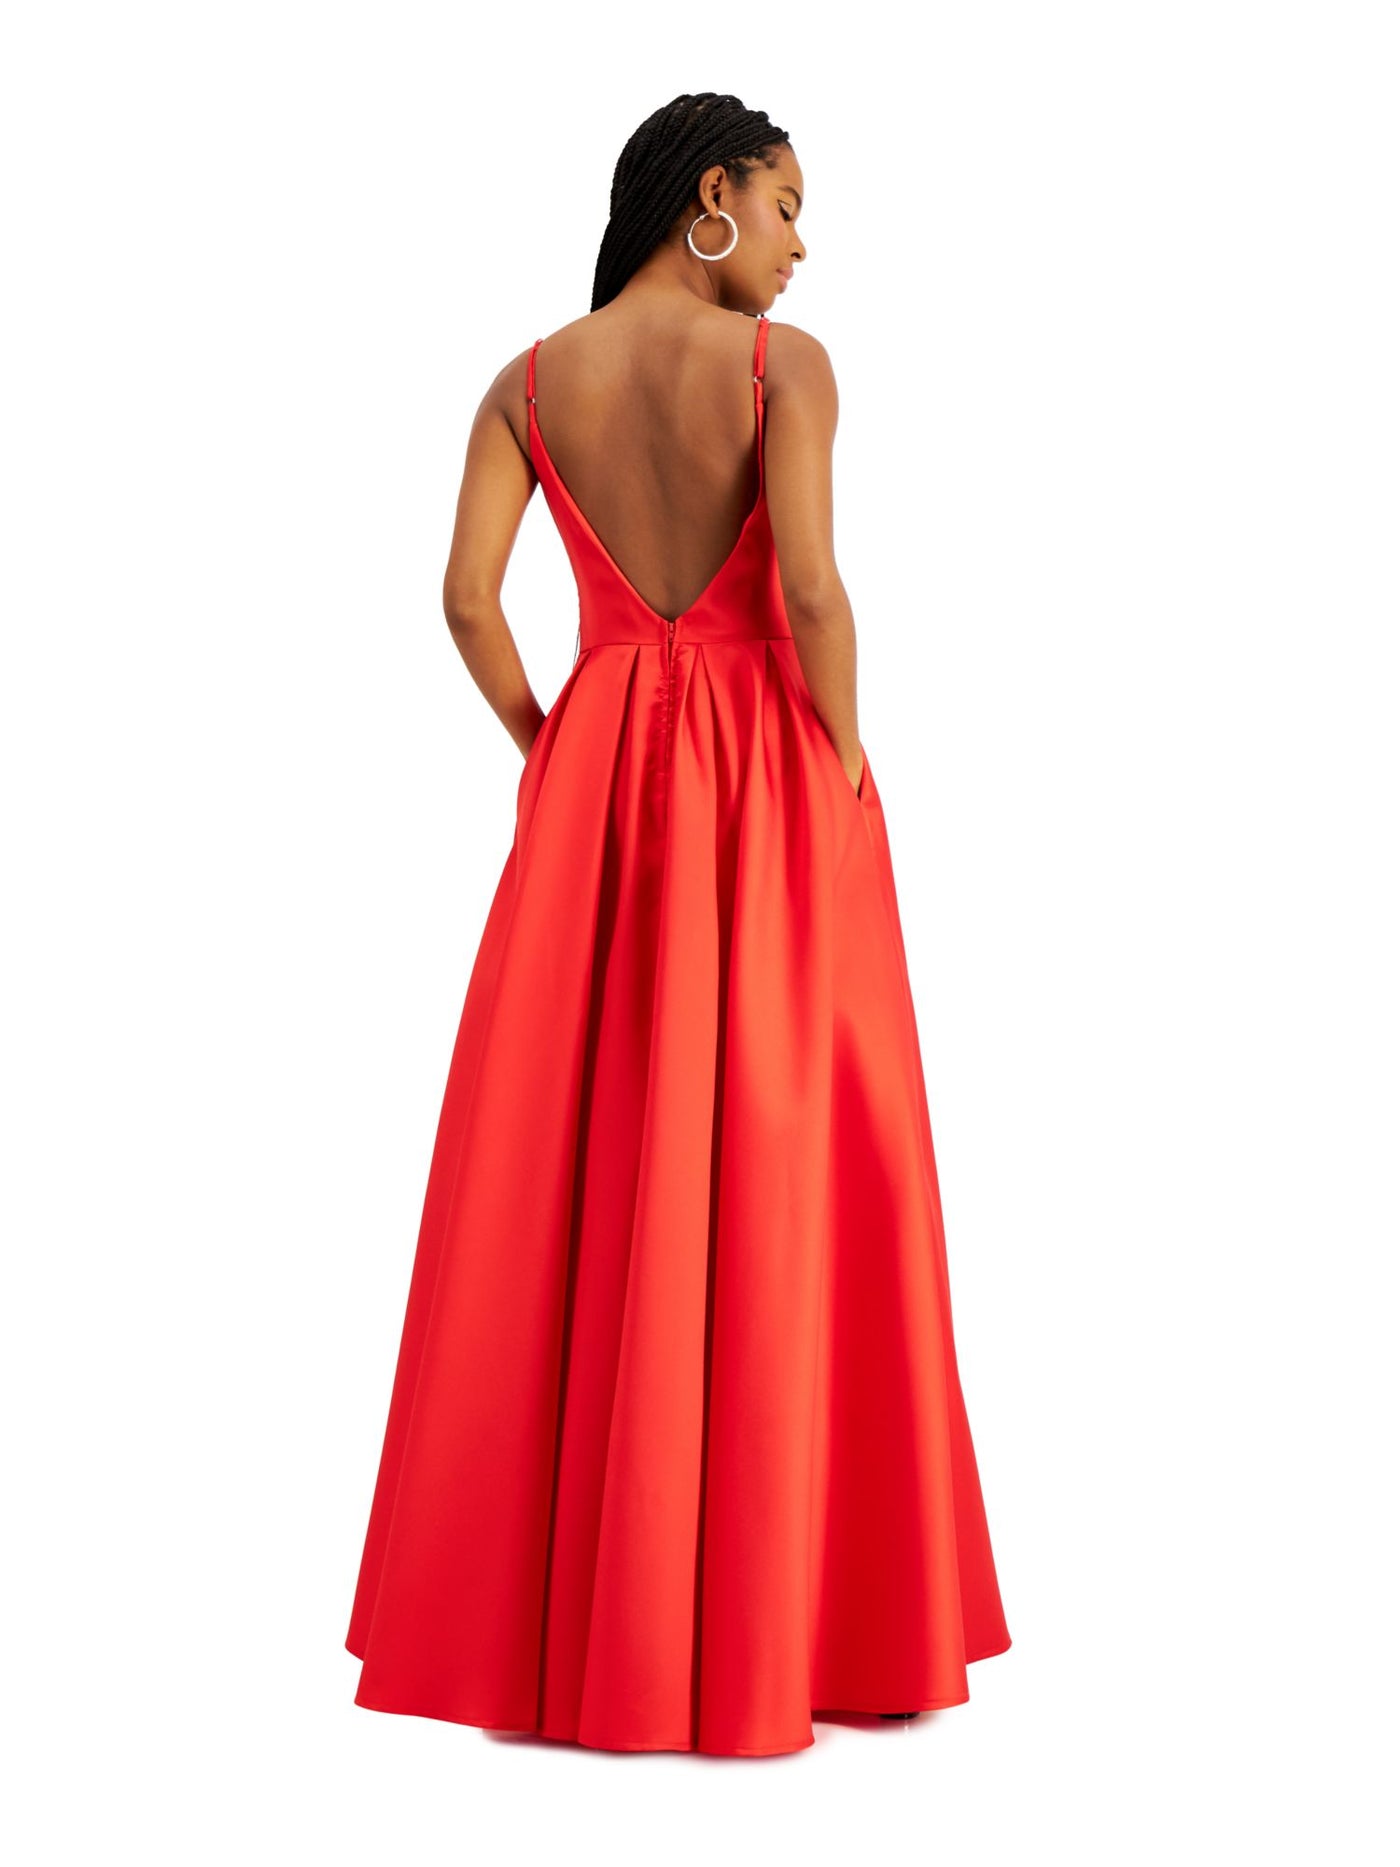 SAY YES TO THE PROM Womens Red Embellished Spaghetti Strap V Neck Full-Length Prom Fit + Flare Dress Juniors 0